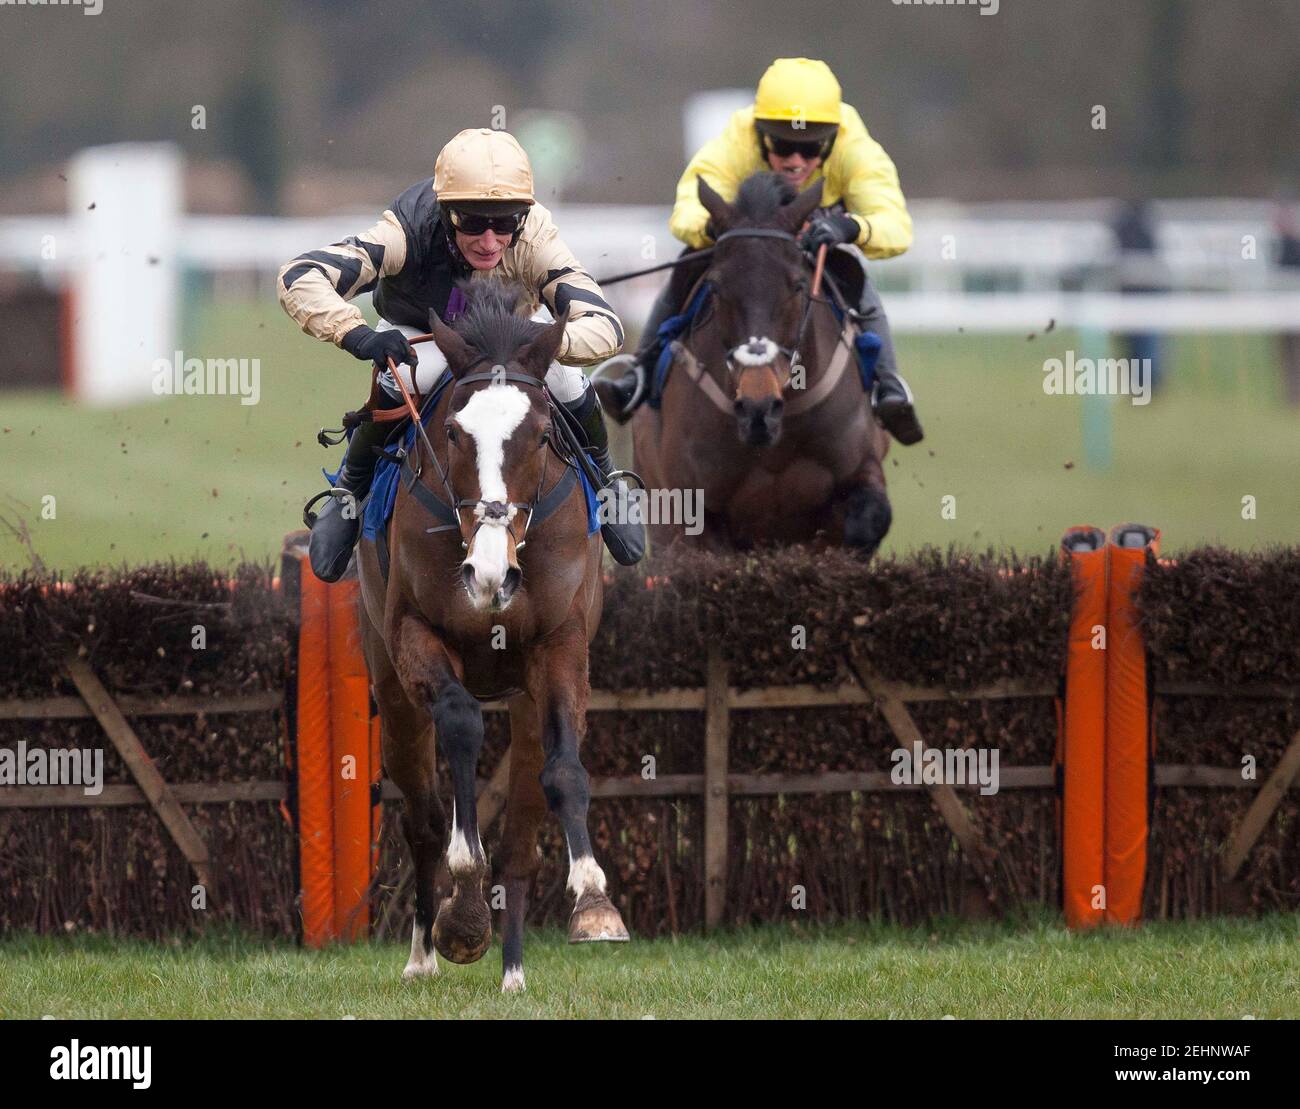 Horse Racing - Fontwell - Fontwell Racecourse - 24/2/13  Prospect Wells ridden by Daryl Jacob lead Dark Lover ridden by Ryan Mahon (R) away from the last flight before going on to win 15.45 totepool National Spirit Hurdle  Mandatory Credit: Action Images / Julian Herbert  Livepic Stock Photo